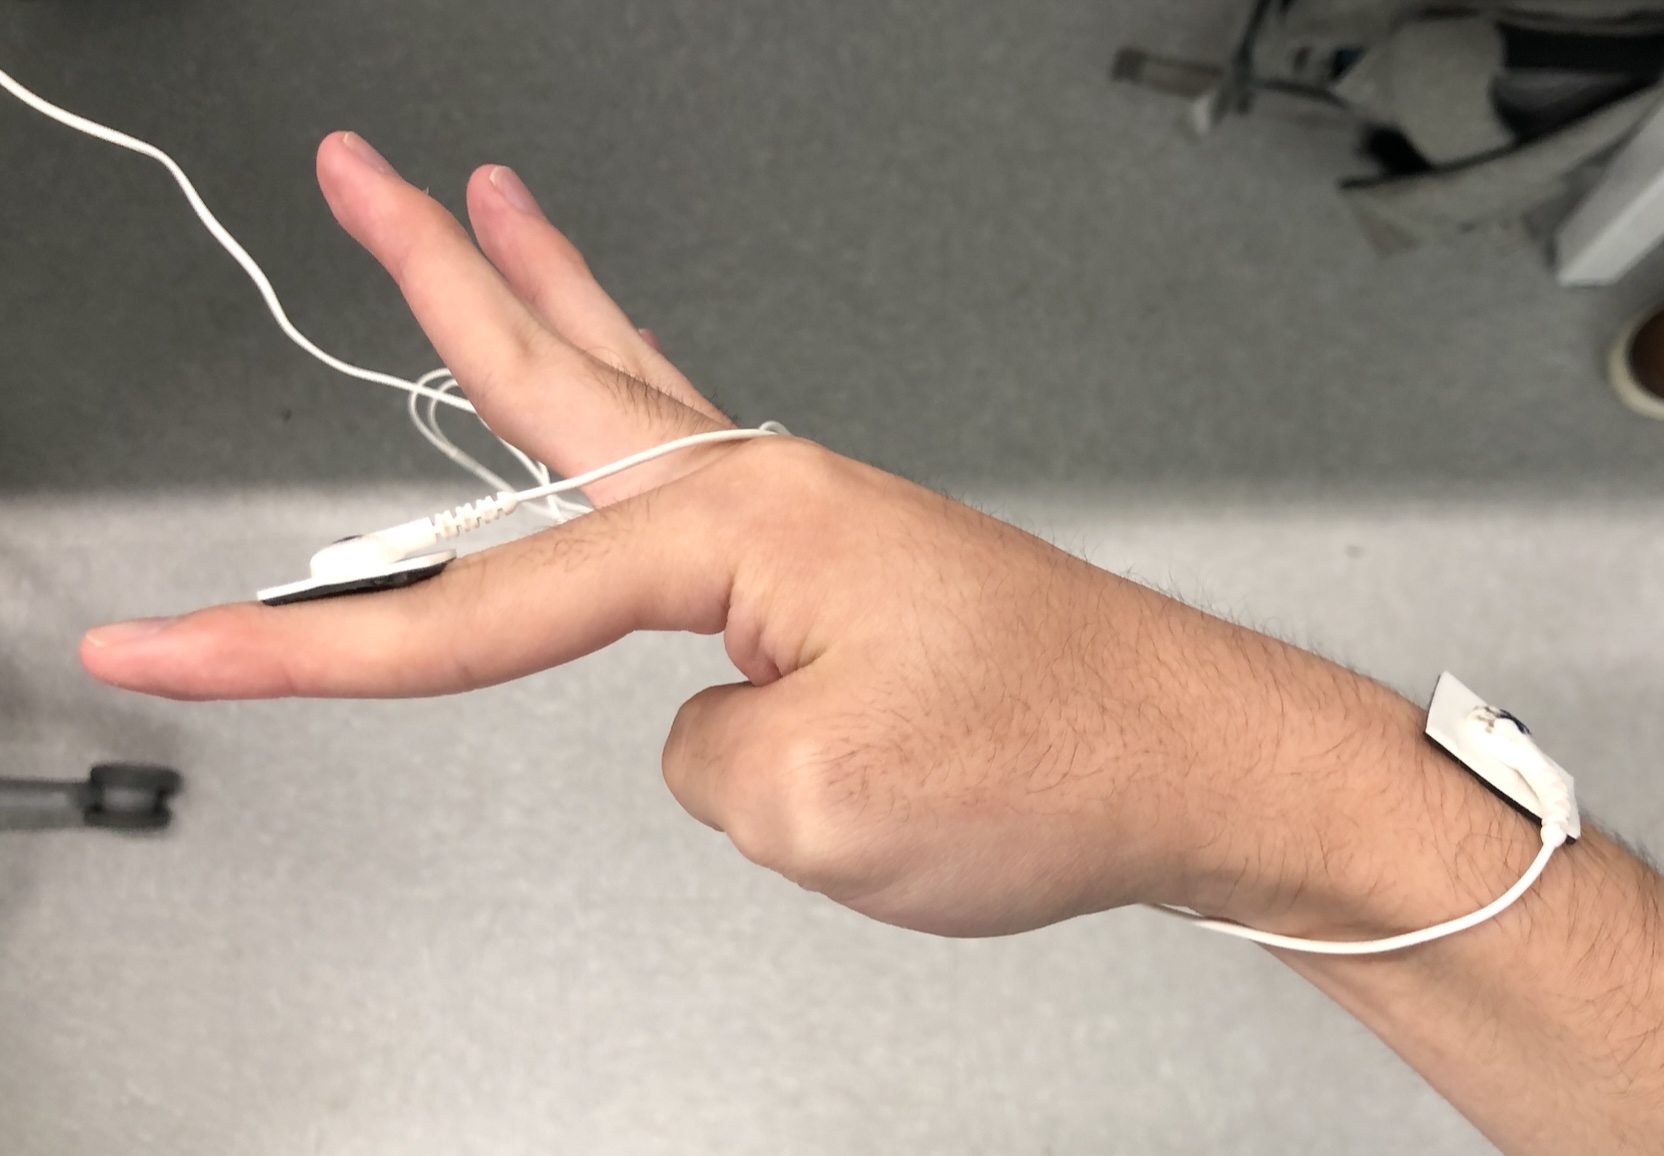 Pad placement for eliciting sensations on the front of the hand